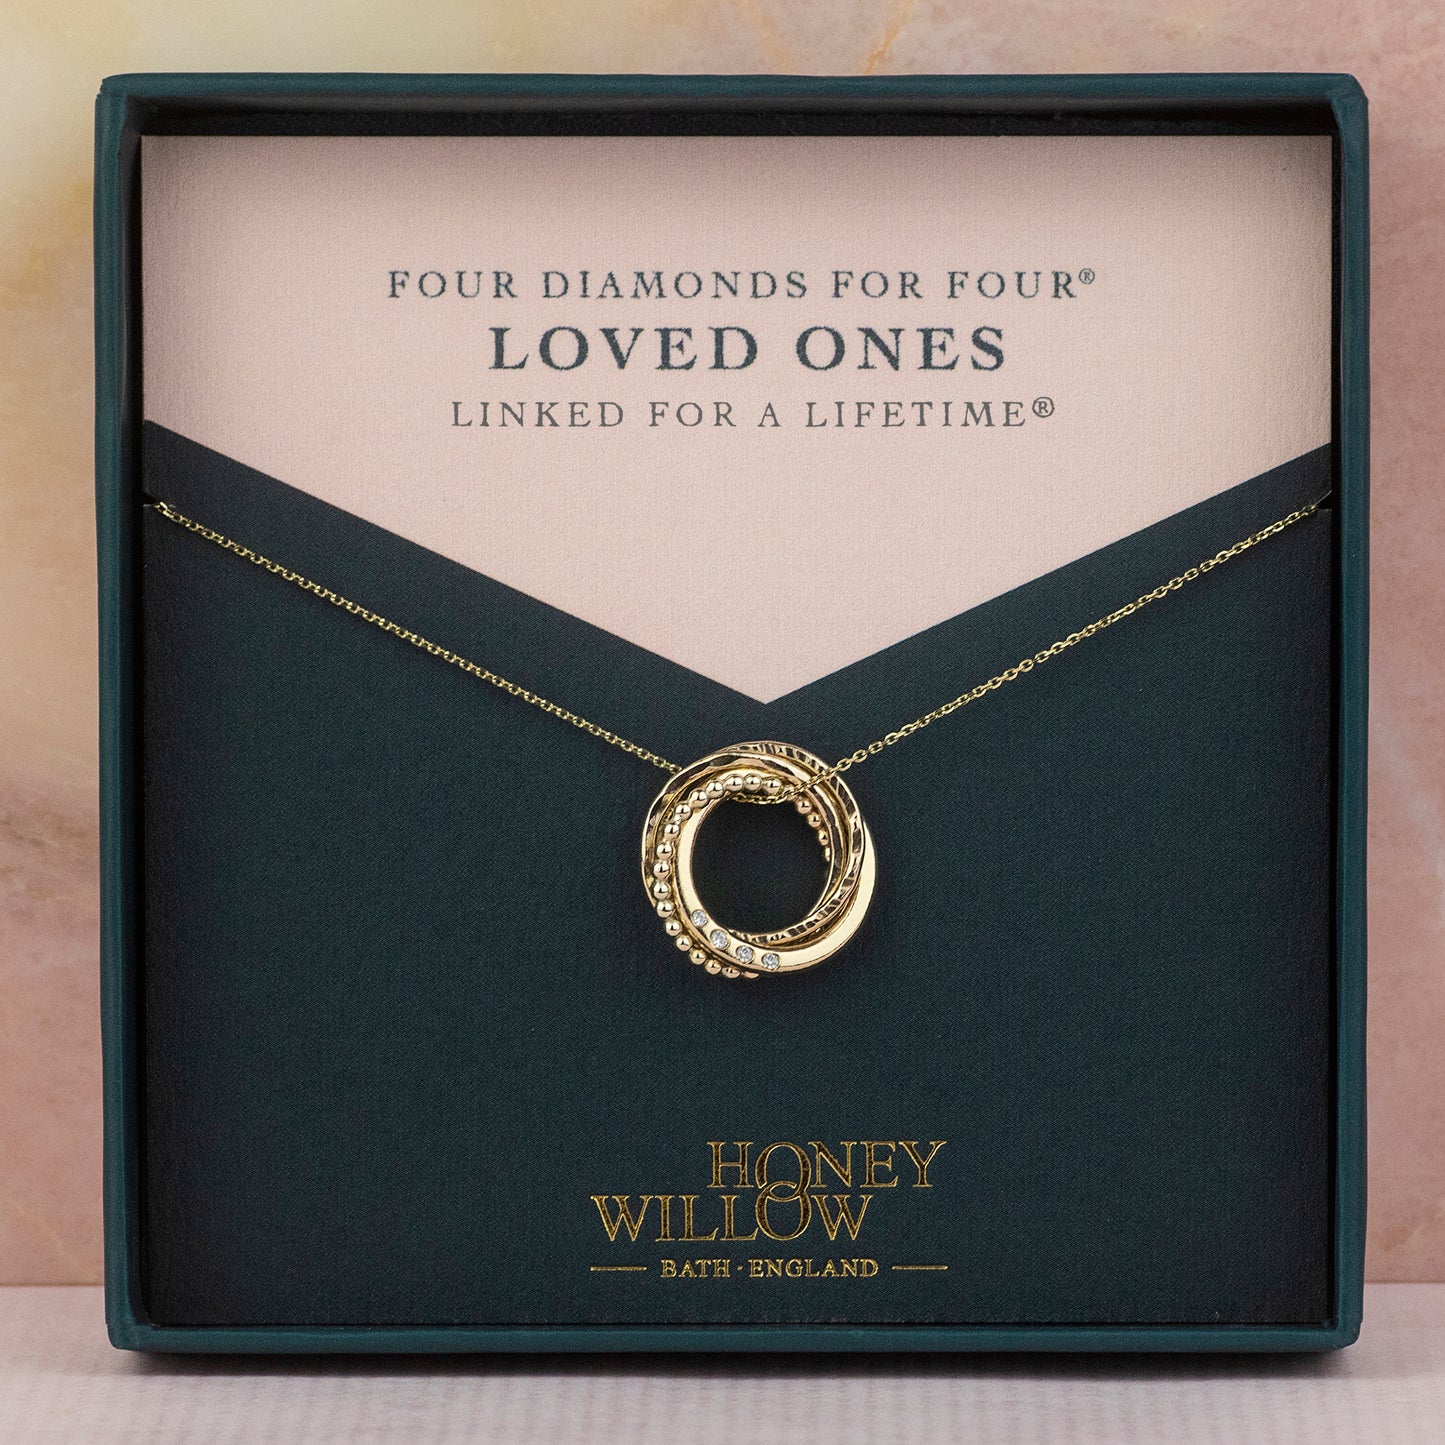 Recycled 9kt Gold Mother's Necklace - 4 Diamonds for 4 Loved Ones